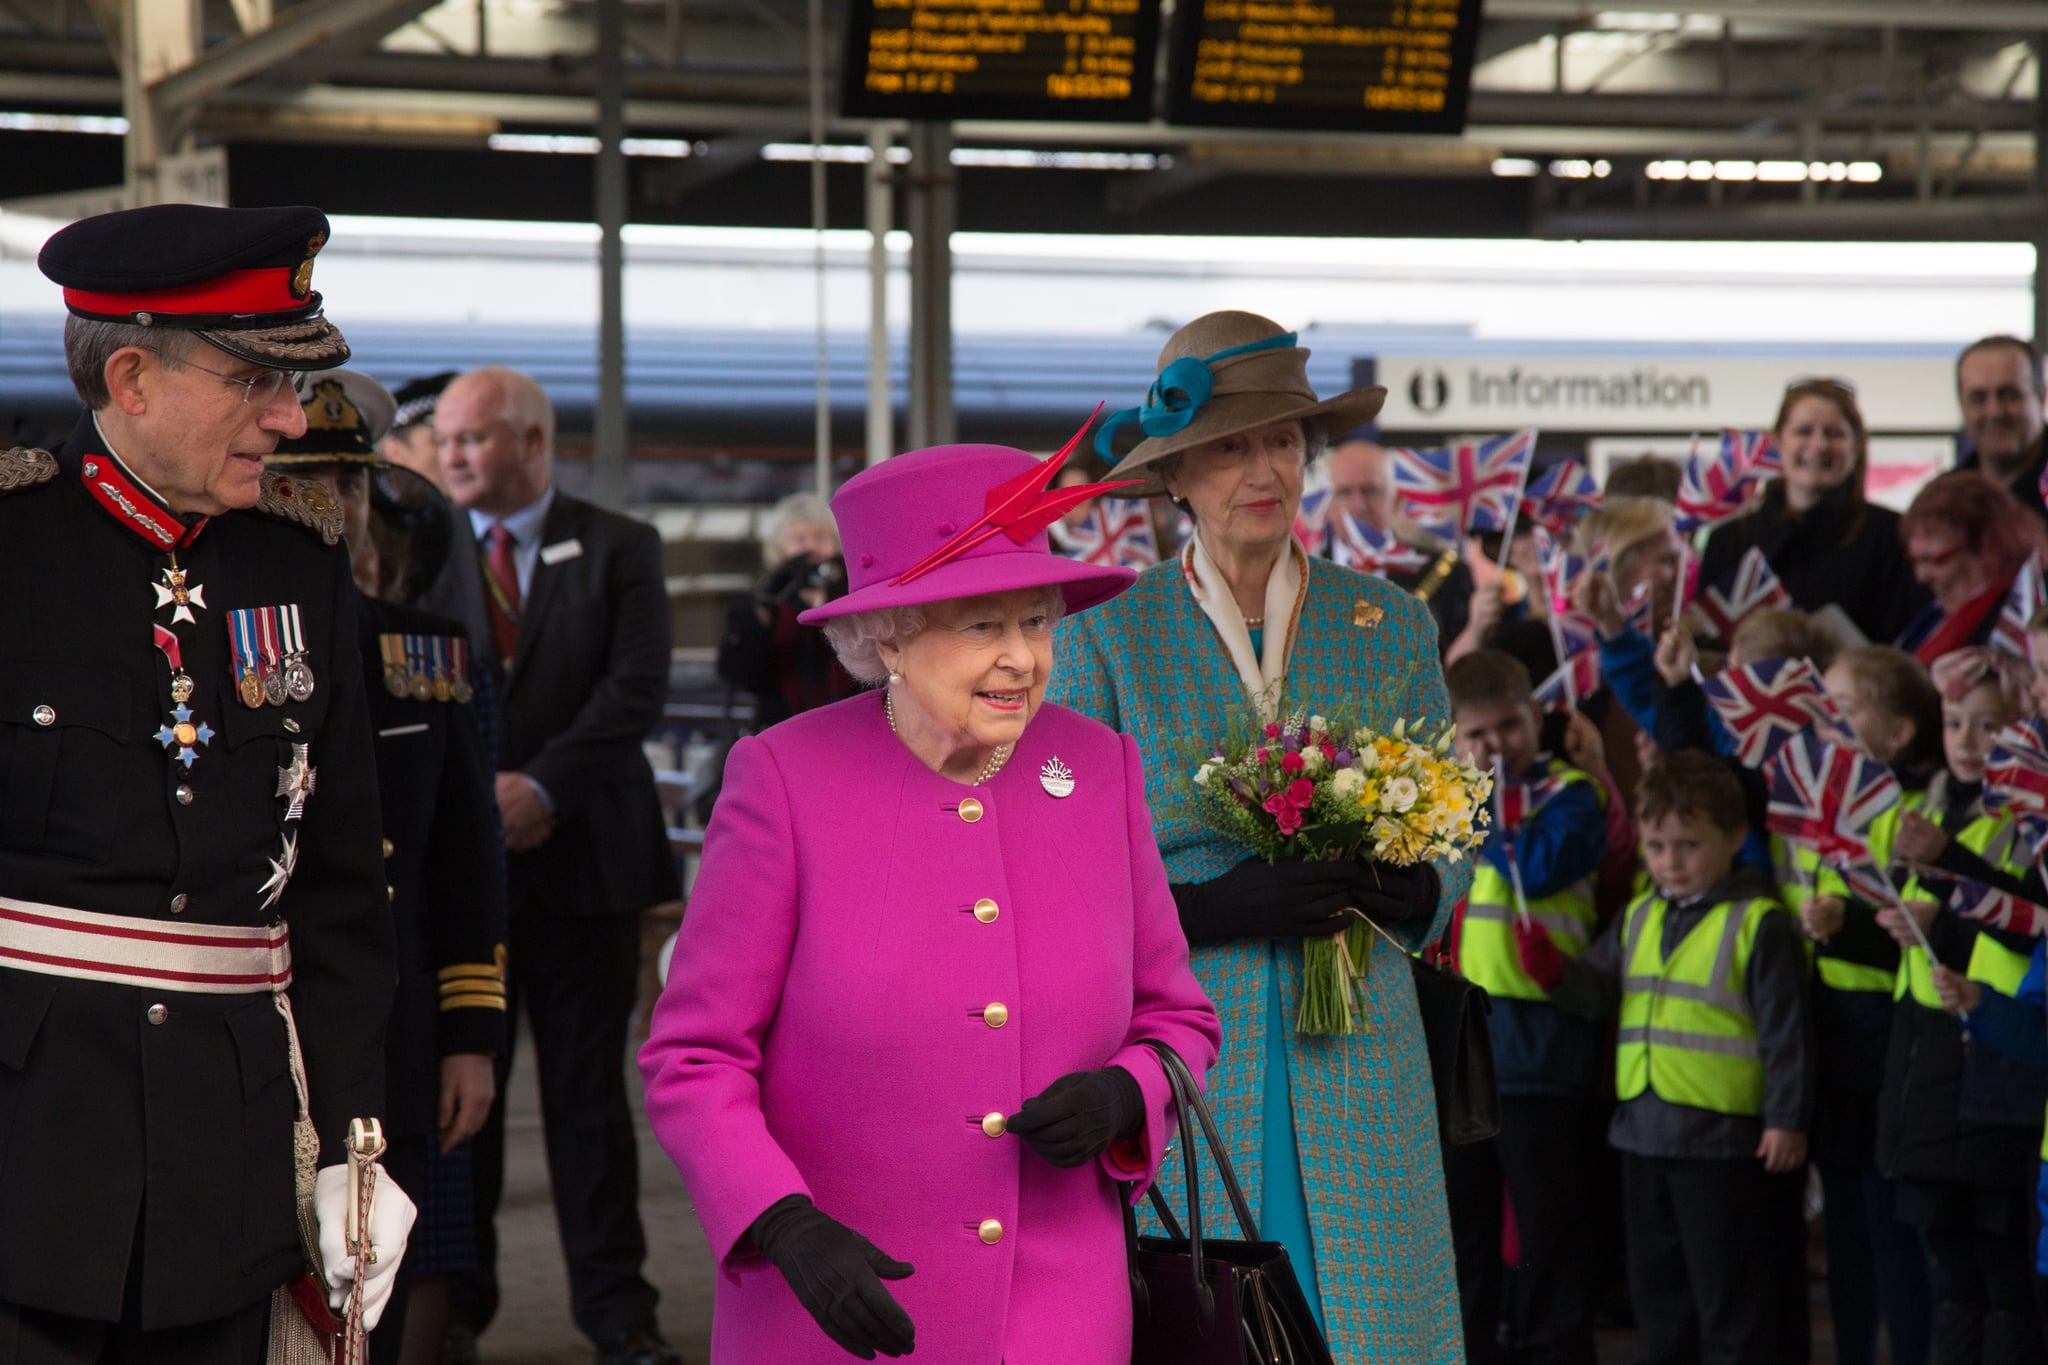 PLYMOUTH, ENGLAND - MARCH 20:  Queen Elizabeth II walks from the platform as she arrives at Plymouth Railway Station as she visits the city on March 20, 2015 in Plymouth, England.  (Photo by Matt Cardy - WPA Pool/Getty Images)